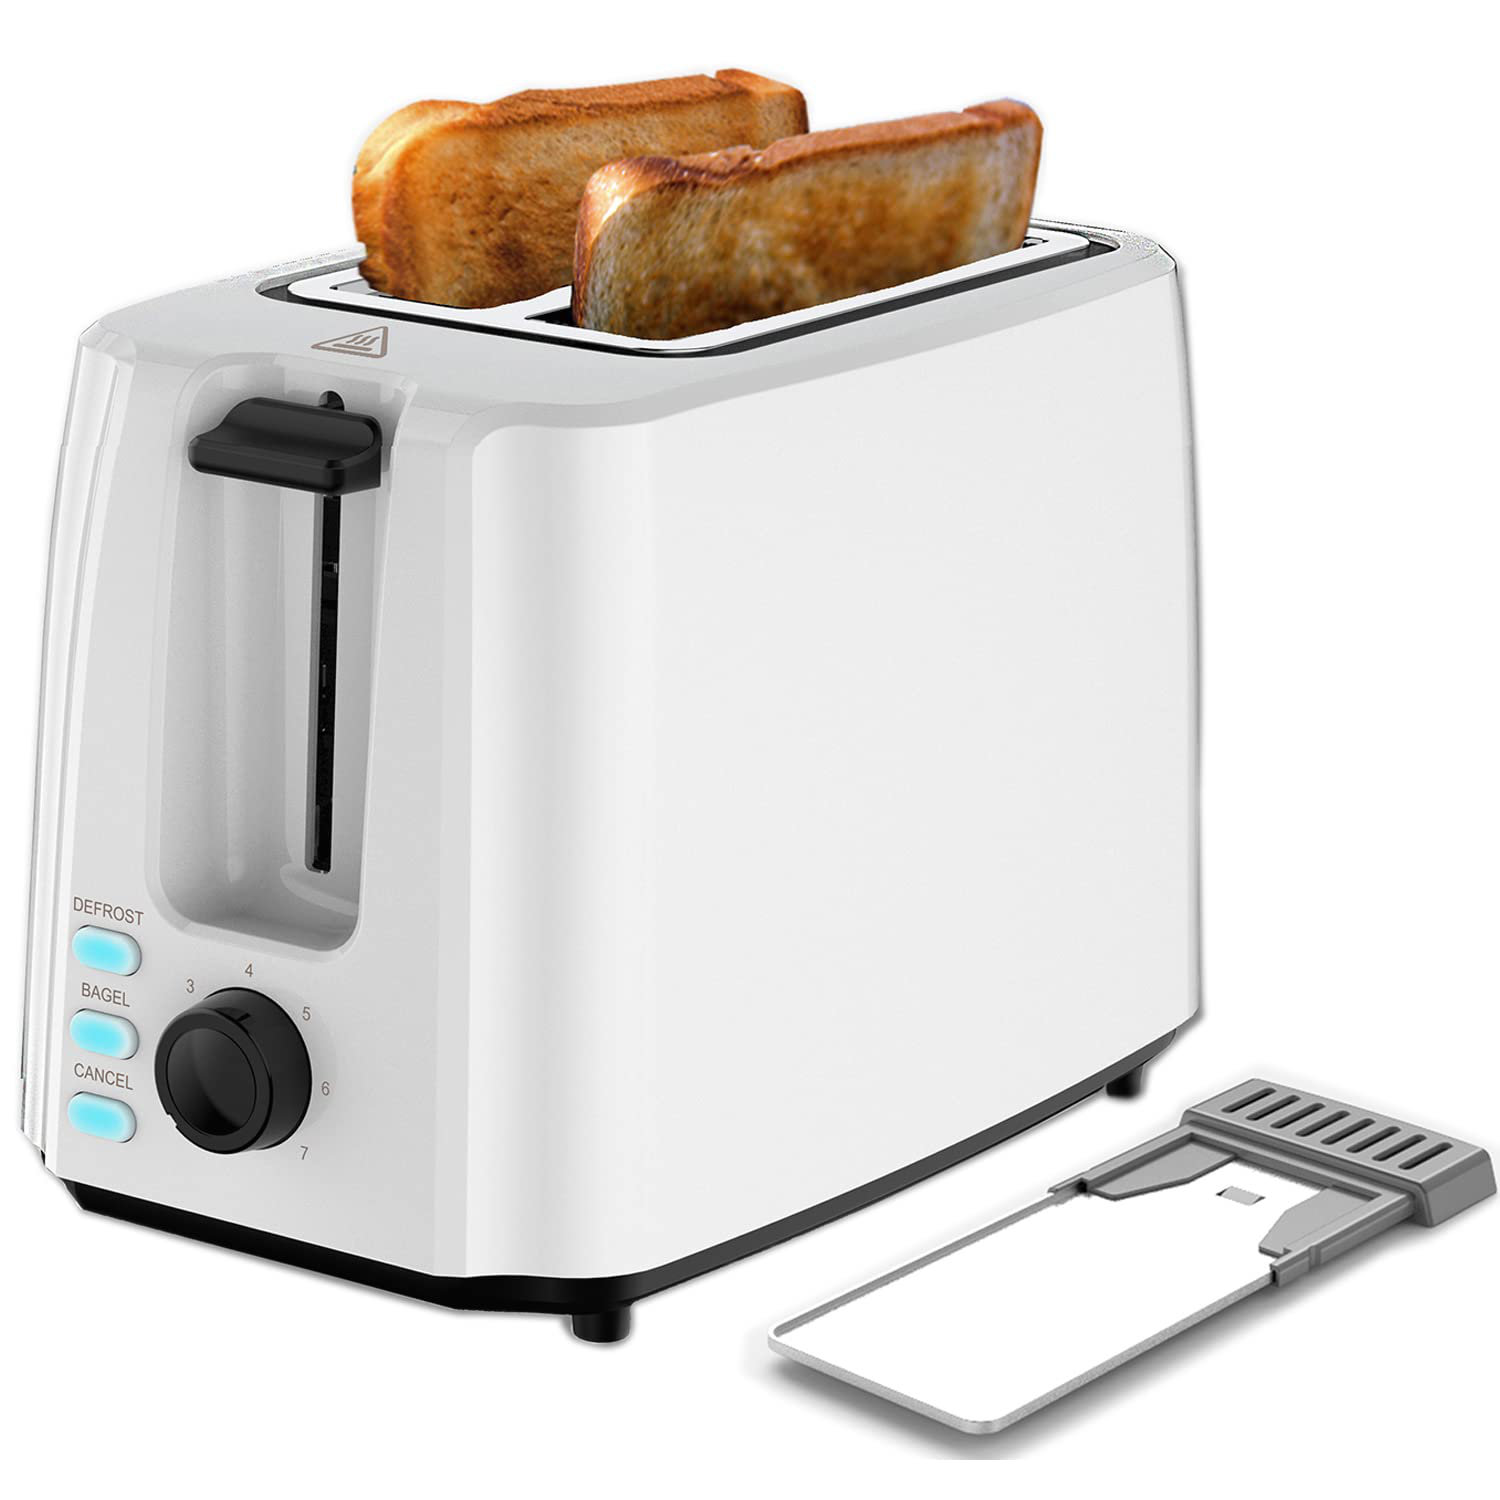 Toaster 2 Slice - Black Toaster Best Rated Prime Wide Slot 2 slice Toaster  Bagel Function, 7 Bread Shade Settings, Removable Crumb Tray Compact